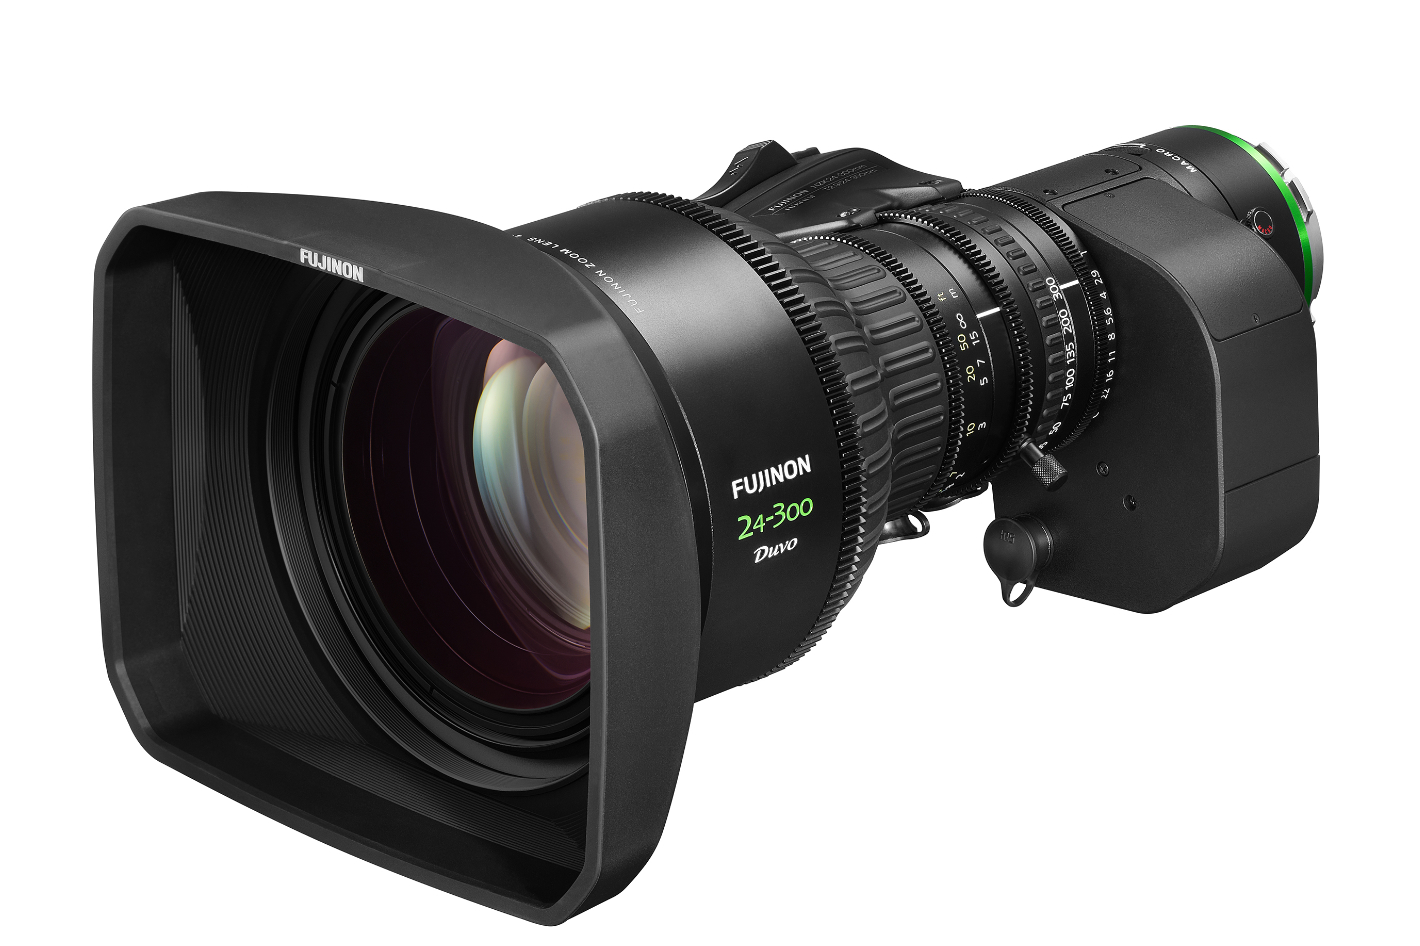 FUJINON Duvo HZK24-300mm PL Mount Zoom Lens now available 2